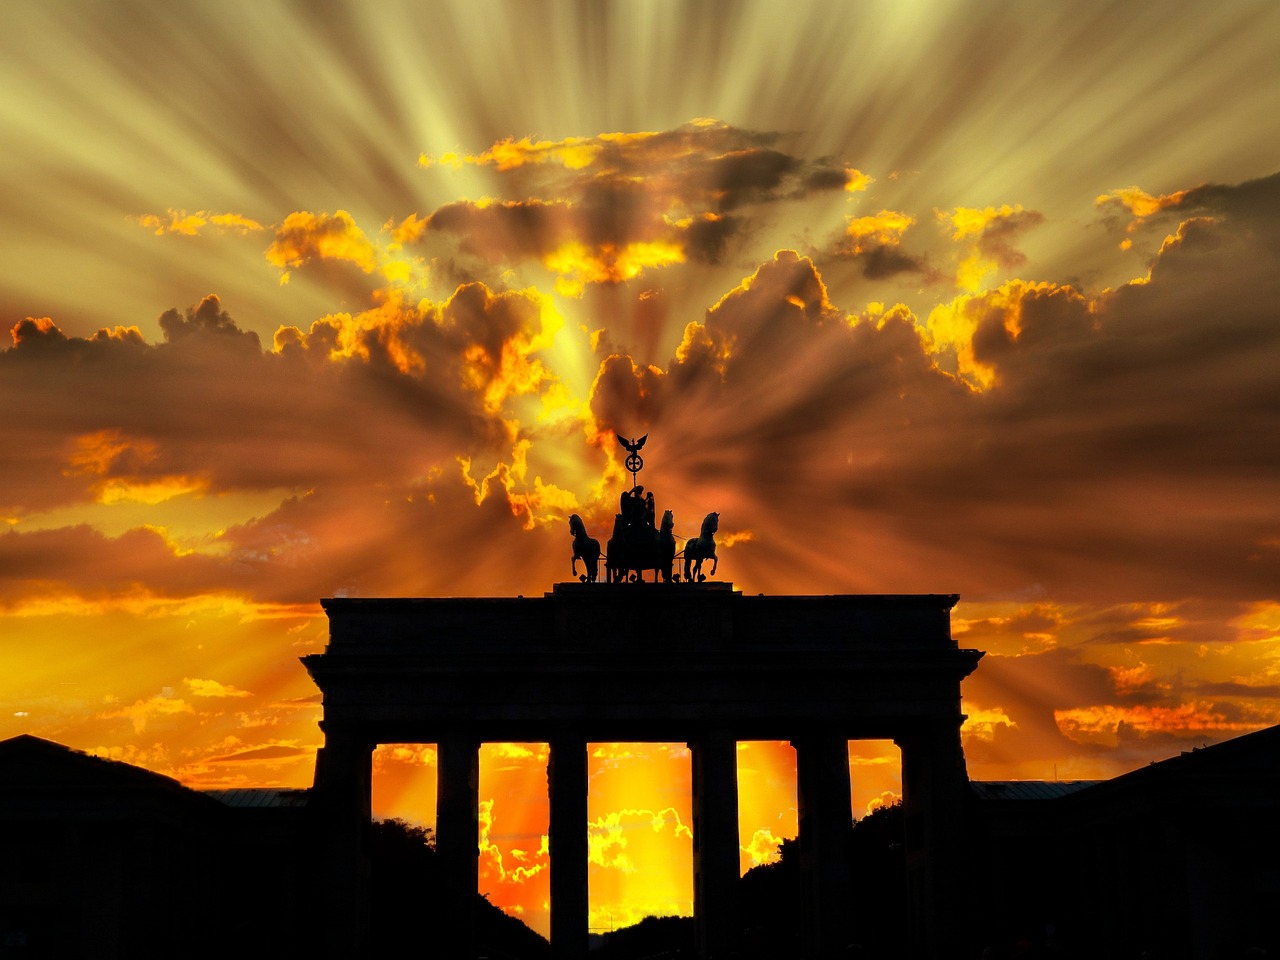 Berlin in 2 Days: Iconic Landmarks, Shopping, Theater, and Culinary Delights